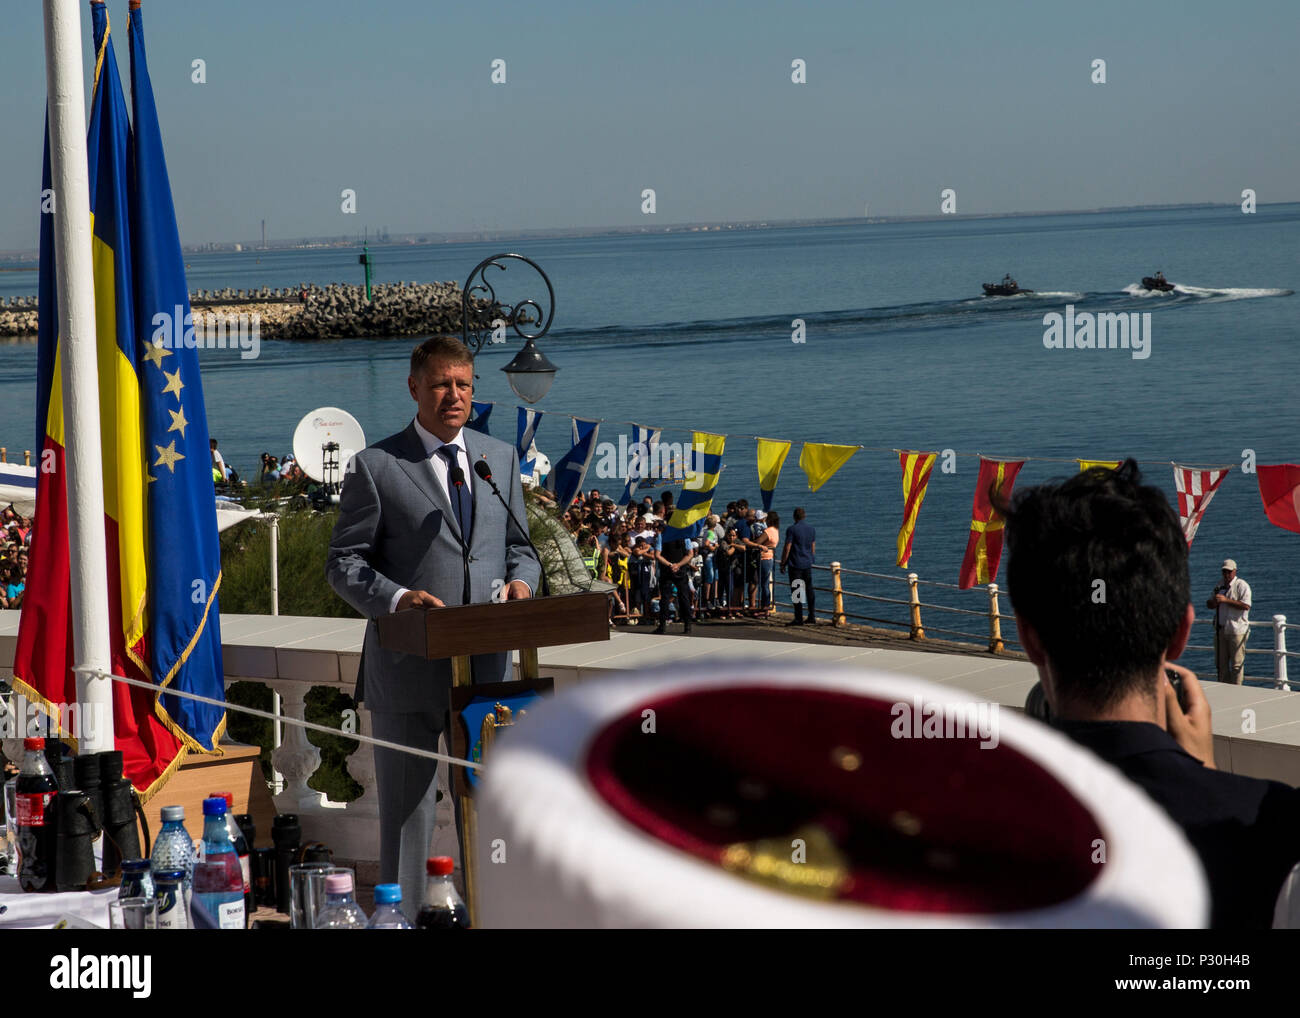 Klaus Iohannia, president of Romania, welcomes guests and U.S. Sailors and Marines supporting the Black Sea Rotational Force 16.2 to the 114th annual Navy Day celebration at the Port of Constanţa, Romania, Aug. 15, 2016. The day payed tribute to the prestigious history of the Romanian navy and highlighted the military’s movement toward new developments and modernizations. Black Sea Rotational Force is an annual multilateral security cooperation activity between the U.S. Marine Corps and partner nations in the Black Sea, Balkan and Caucasus regions designed to enhance participants’ collective p Stock Photo